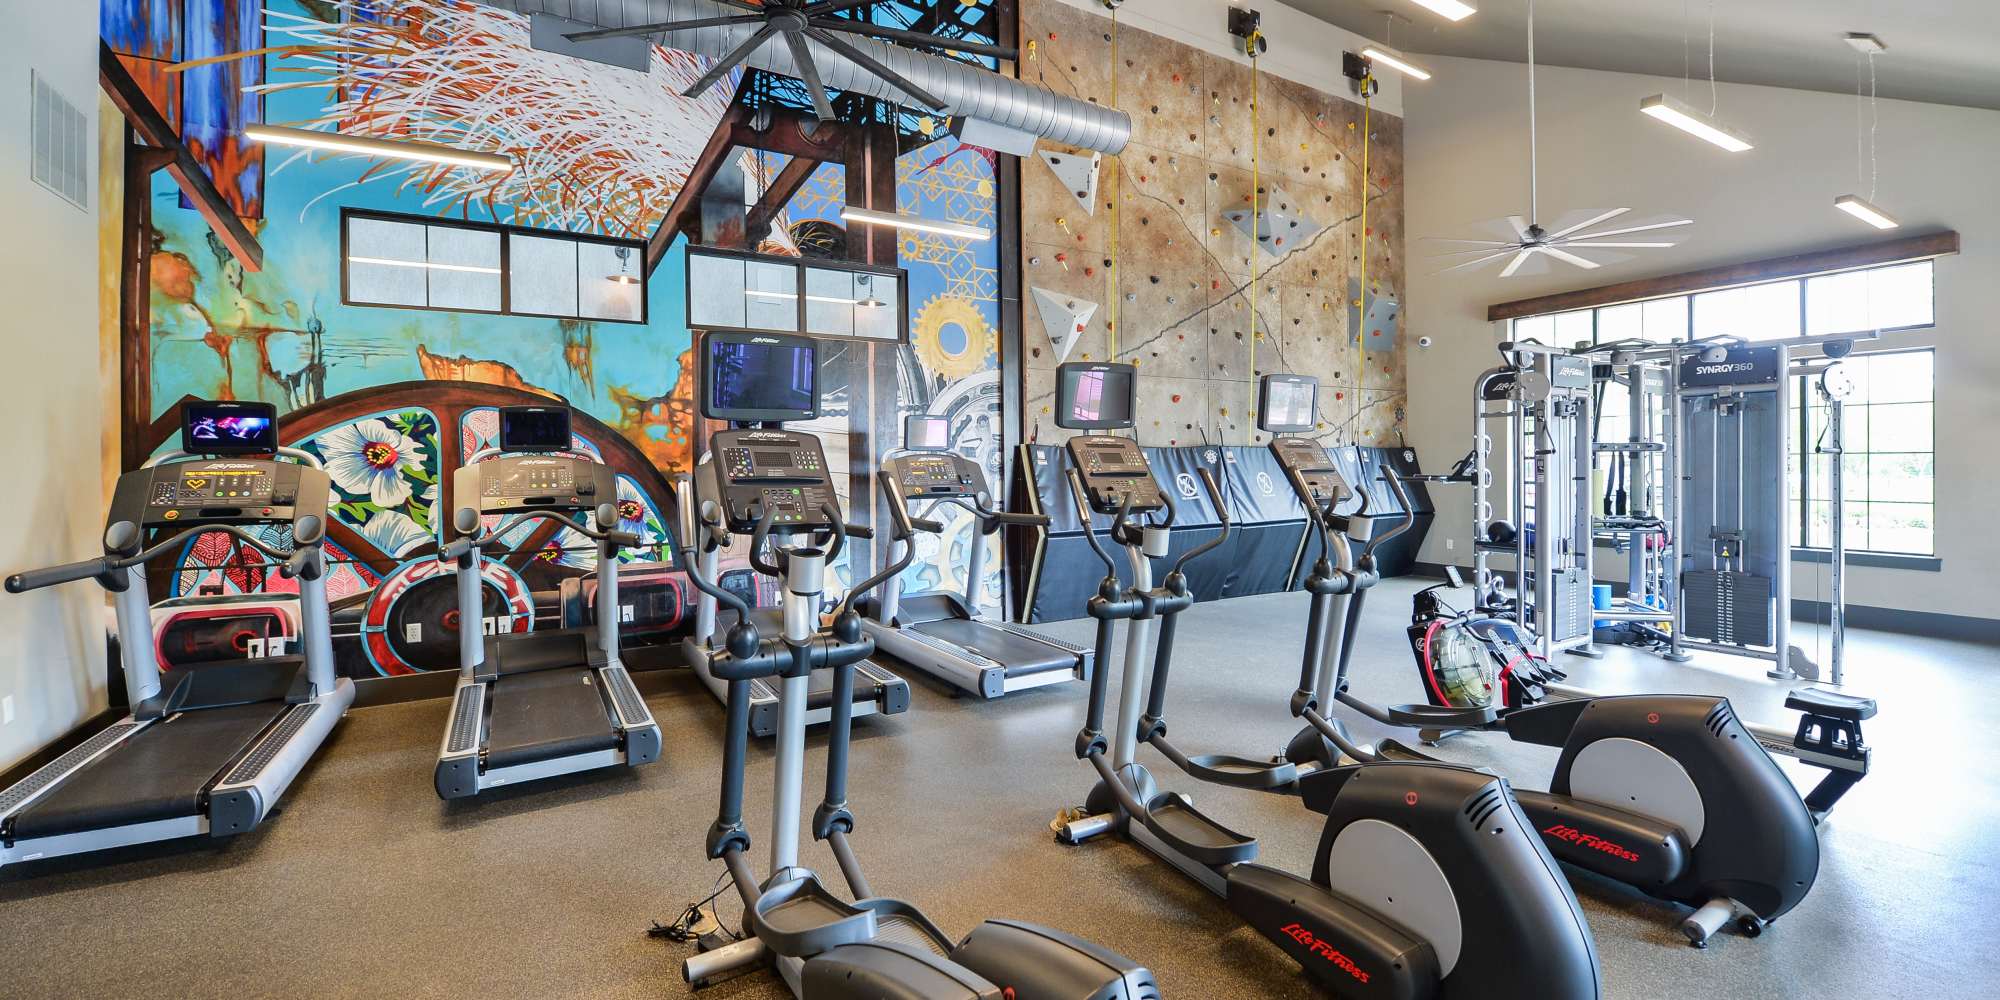 Fitness center at Riverworks in Phoenixville, Pennsylvania